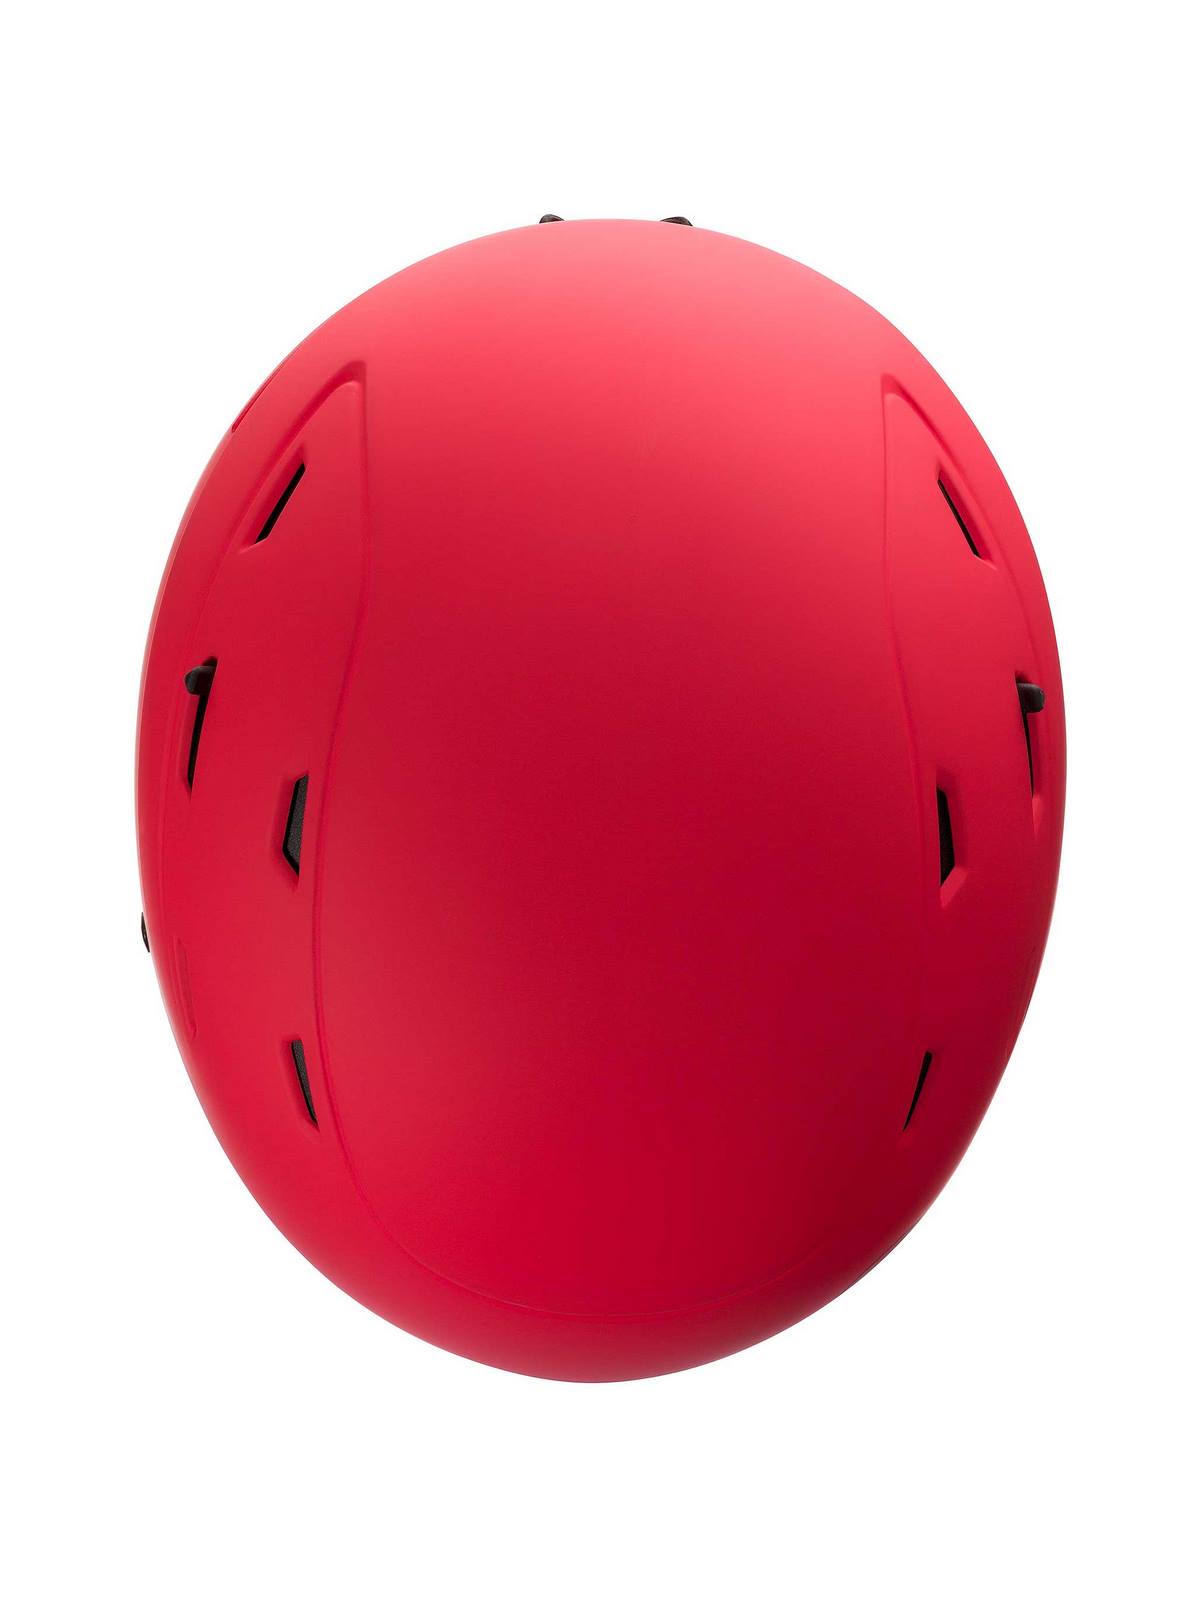 Kask Narciarski ROSSIGNOL REPLY IMPACTS RED